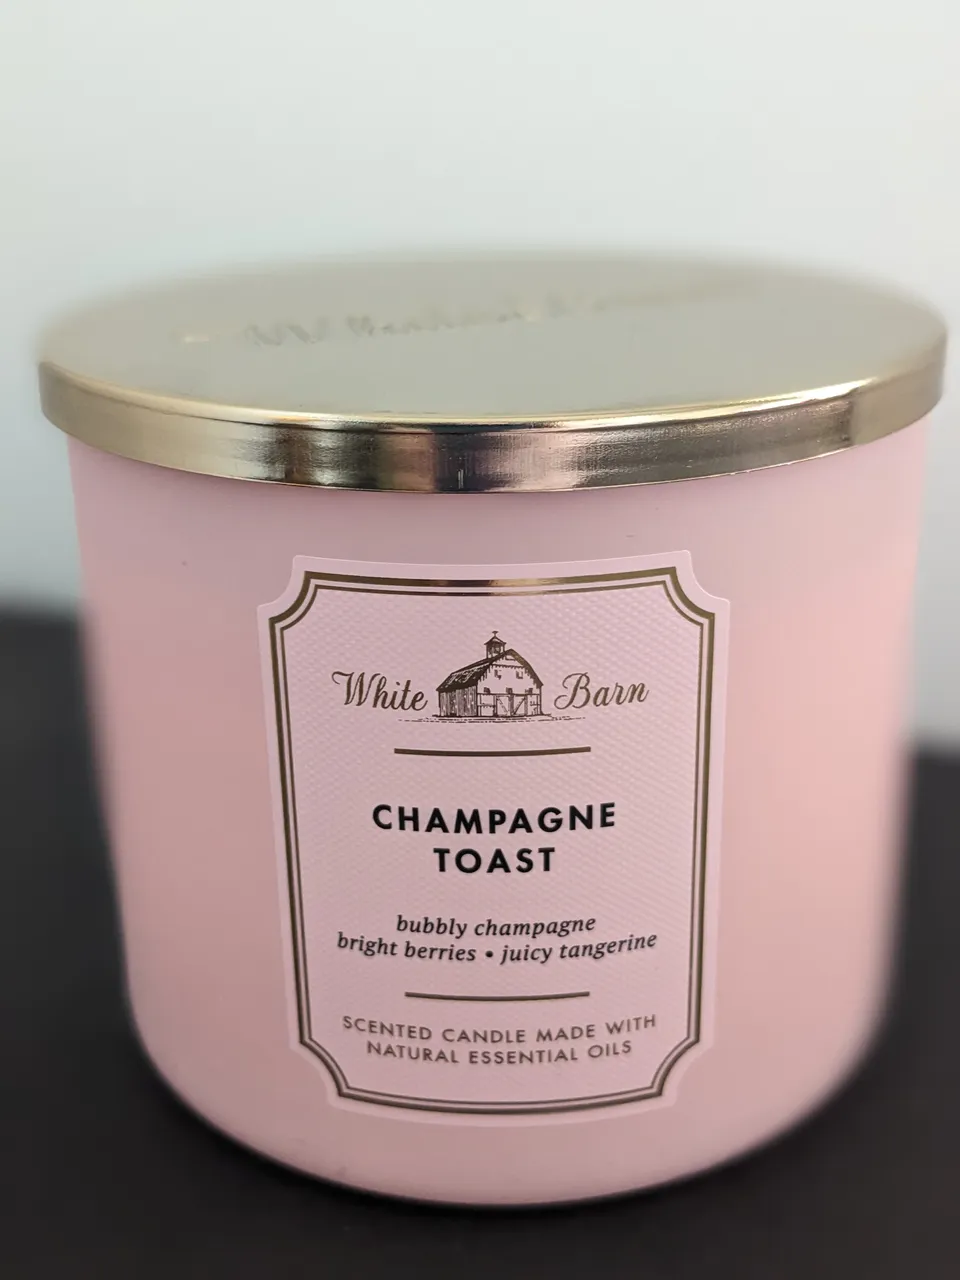 Bath and Body Works Champagne Toast Candle